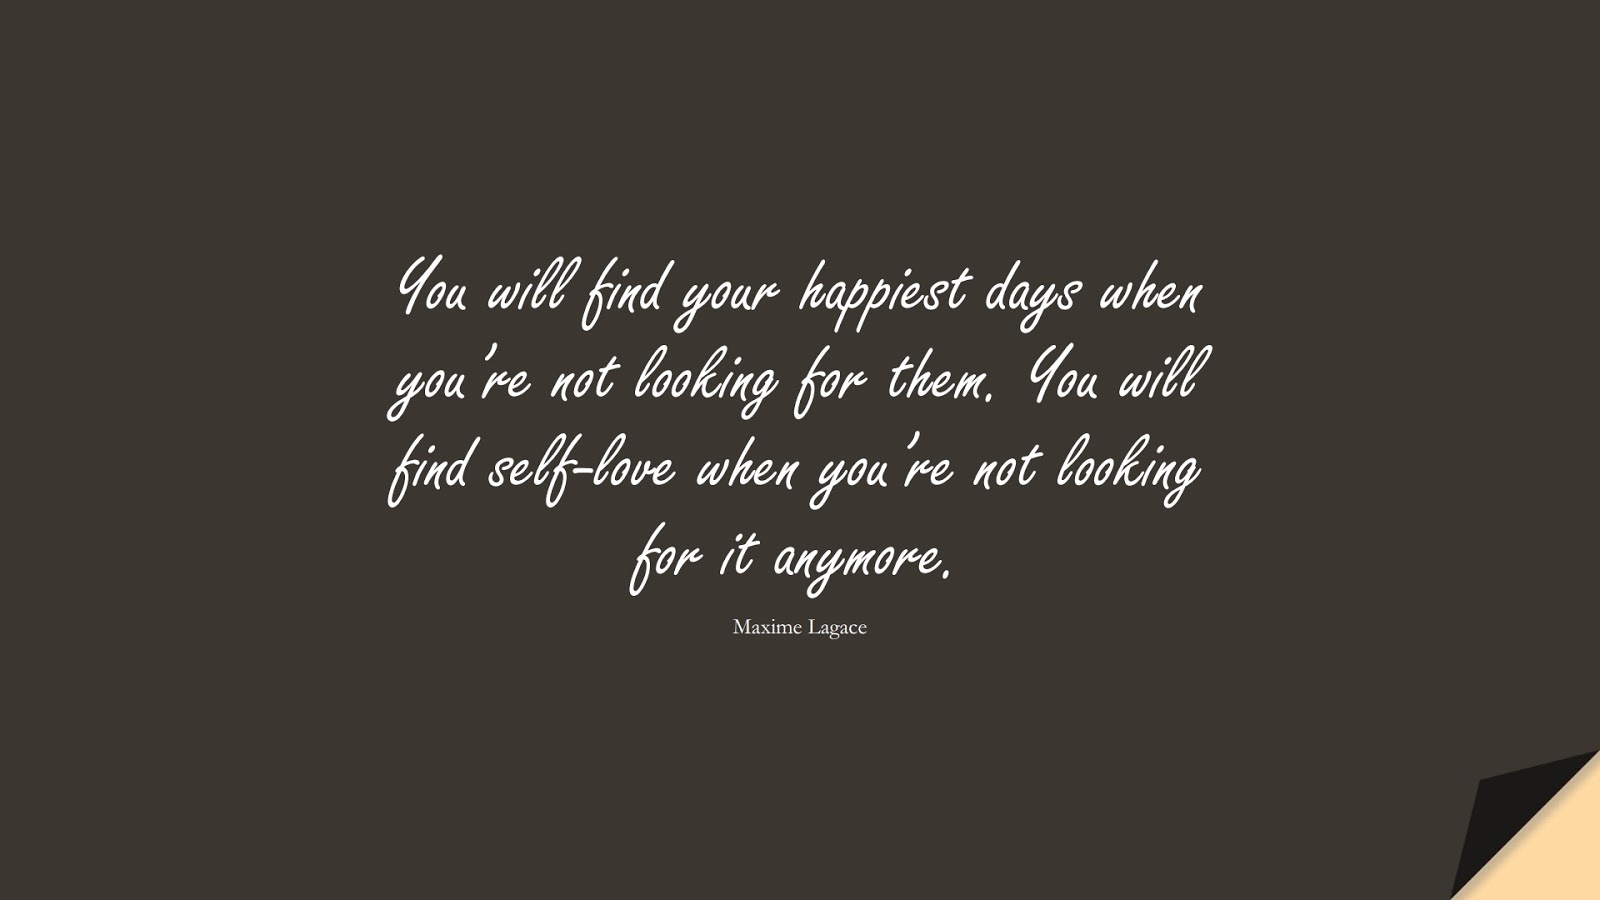 You will find your happiest days when you’re not looking for them. You will find self-love when you’re not looking for it anymore. (Maxime Lagace);  #LoveQuotes